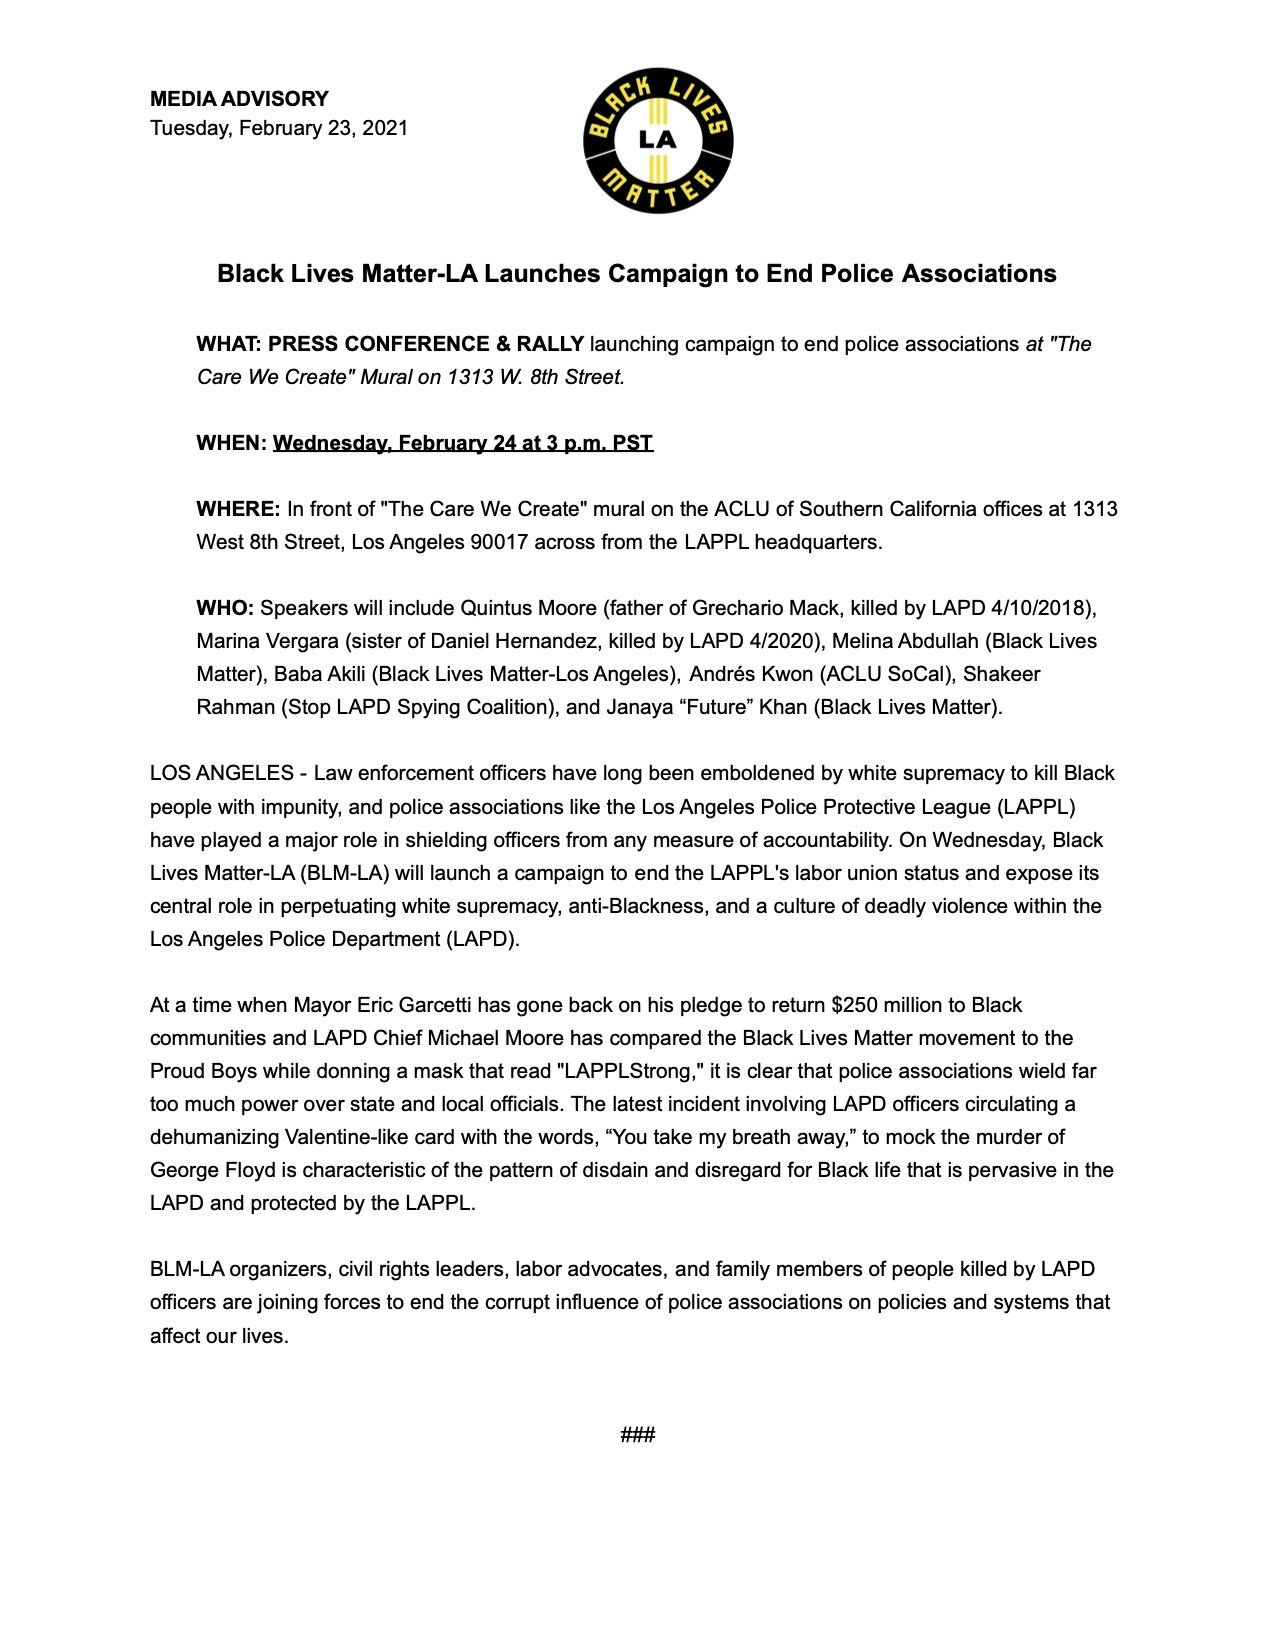 Copy of Media Advisory-Issued 2-23-21-End Police Associations Campaign Press Conference & Rally.jpg